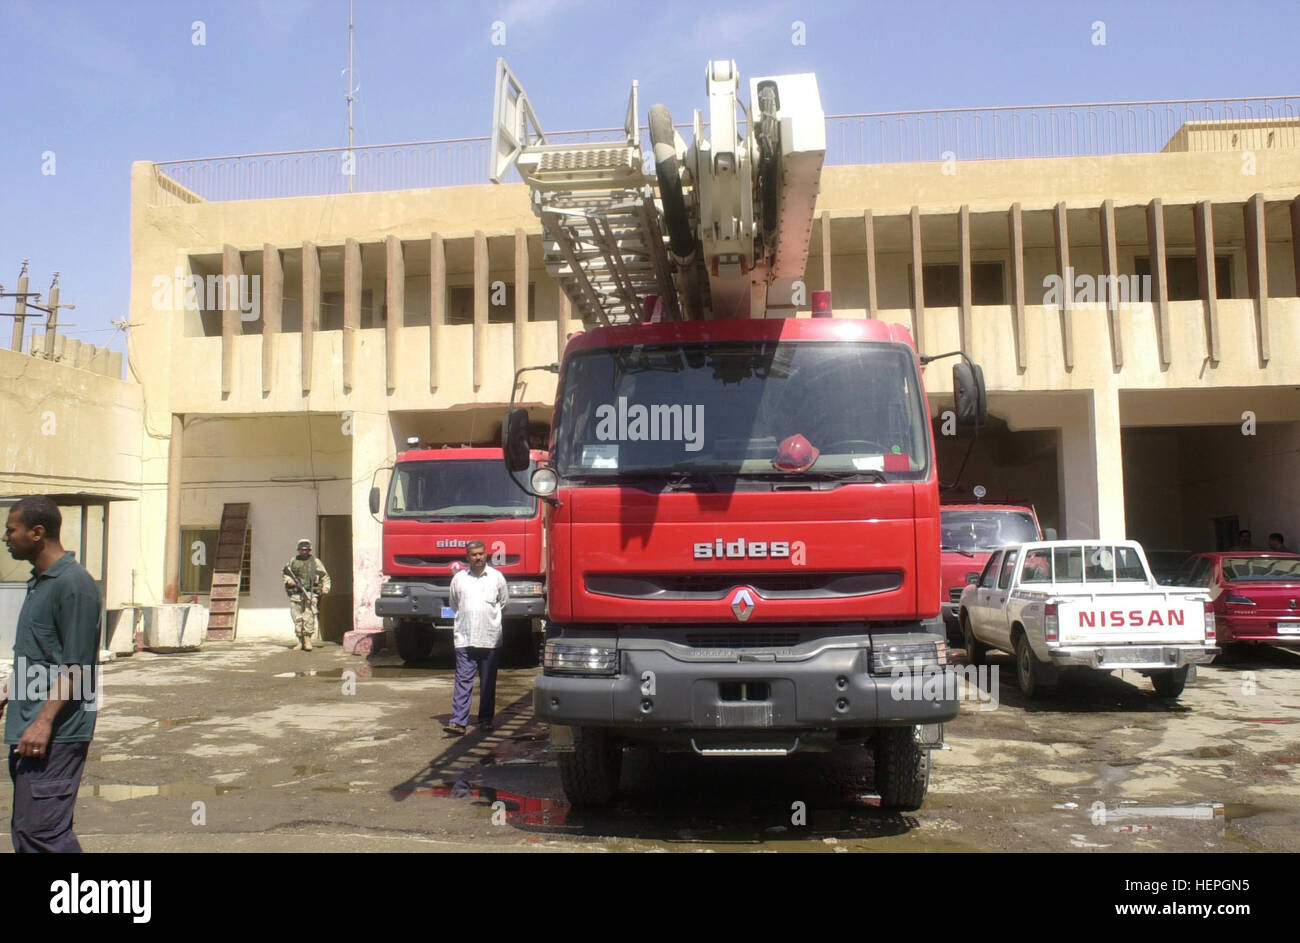 A fire truck parked outside a fire station in Baghdad, Iraq on April 23, 2003. U.S. Army Civil Affairs soldiers made a visit to the station along with Baghdad's new interim Fire Chief Dr. Ali Saeed Sadoon. Civil Affairs soldiers are helping the city hire firefighters and get equipment back up and running.  U.S. forces are in Iraq in support of Operation Iraqi Freedom(OIF). OIF is the multinational  coalition effort to liberate the Iraqi people, eliminate Iraq's weapons of mass destruction and end the regime of Saddam Hussein. (U.S. Army photo by Staff Sgt. Kevin P. Bell) (Released) Iraqi Renau Stock Photo